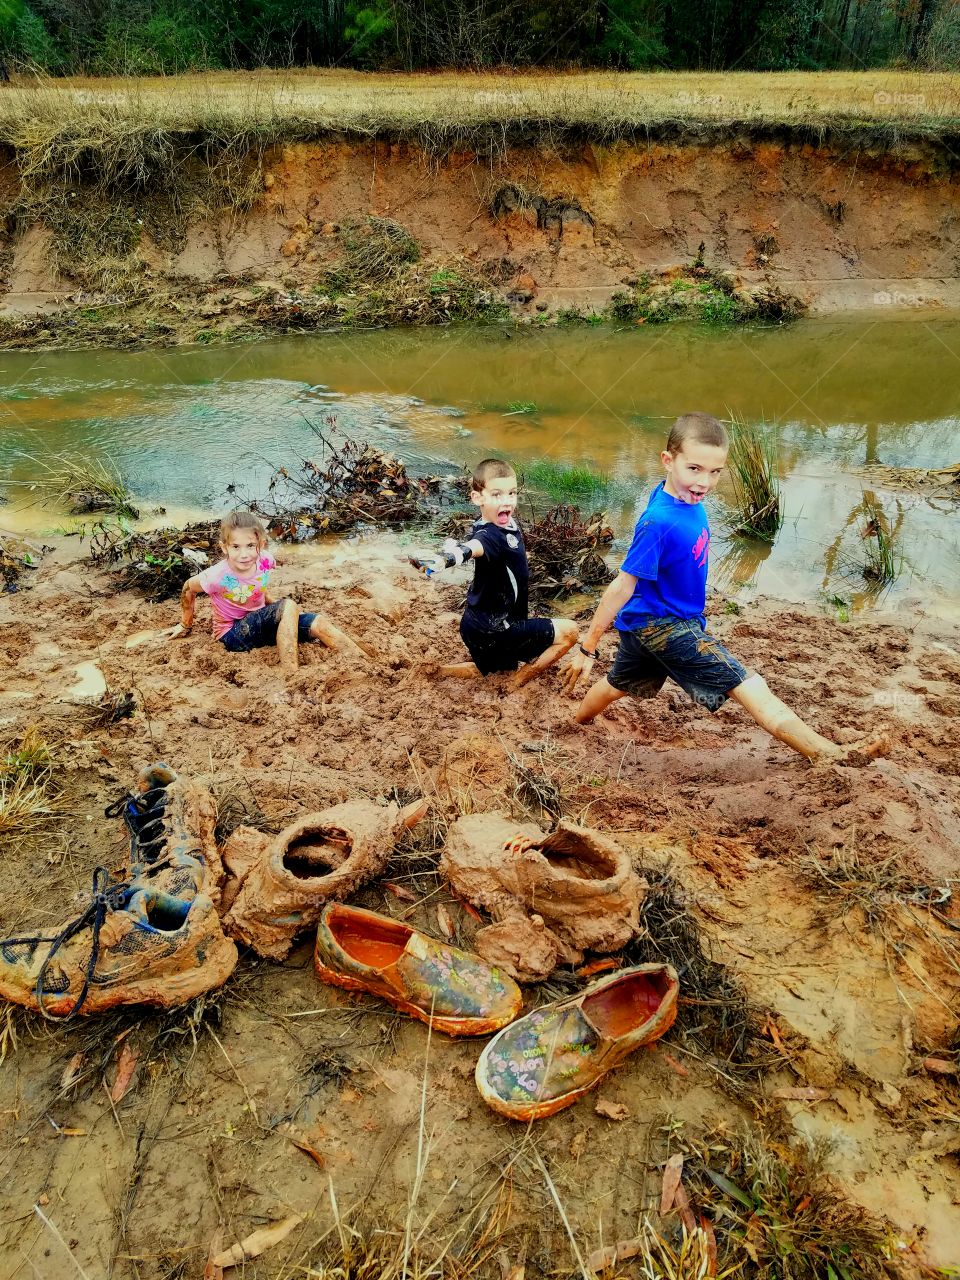 kids in the mud Vidor Texas United States of America January 2018